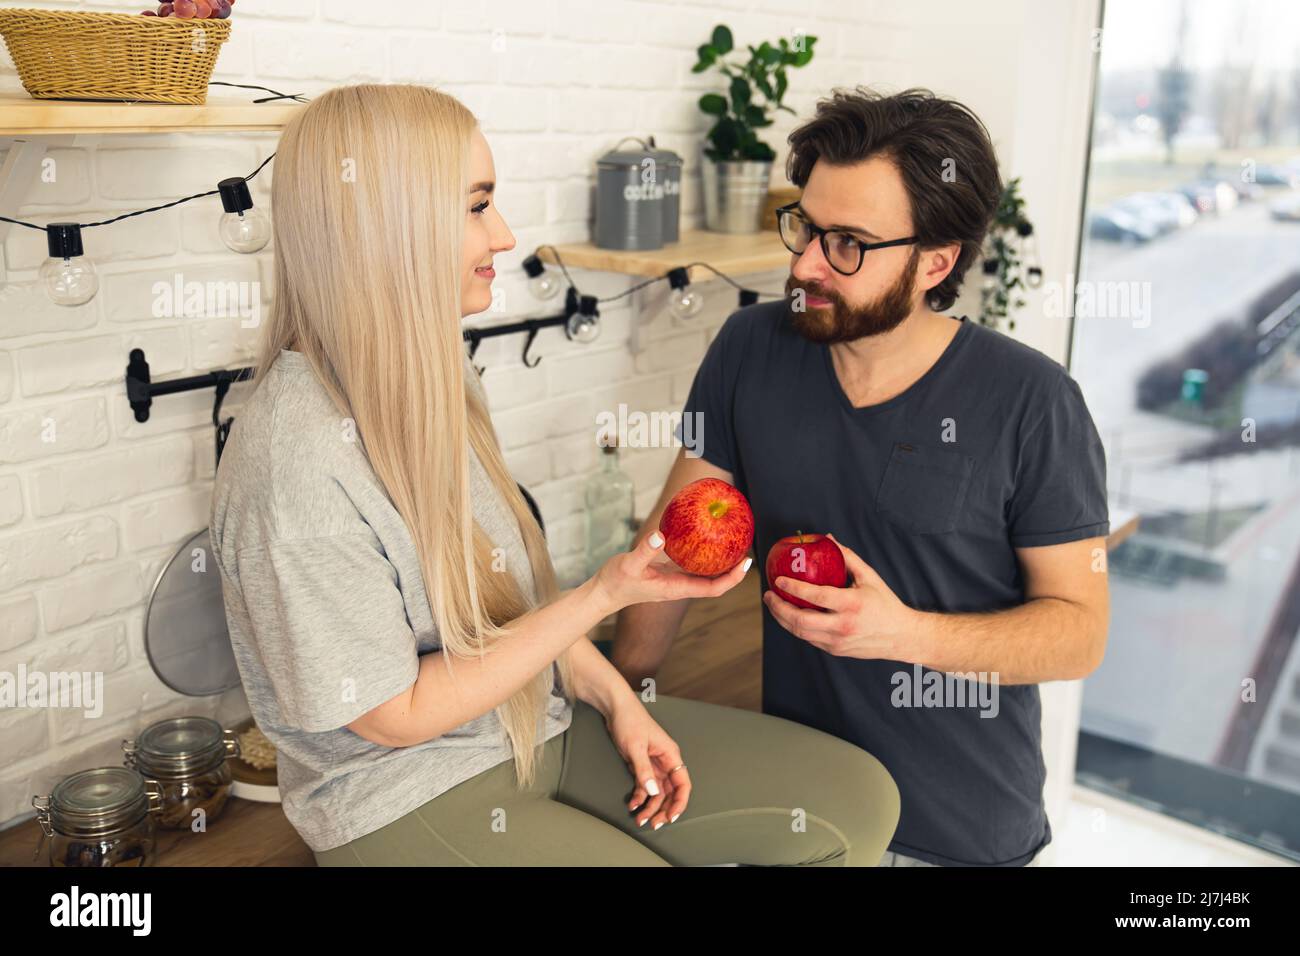 Togheterness concept. Caucasian woman and man in their 20s looking at each other with love and affection holding red juicy apples. Woman sitting on a kitchen counter, man standing near her. High quality photo Stock Photo